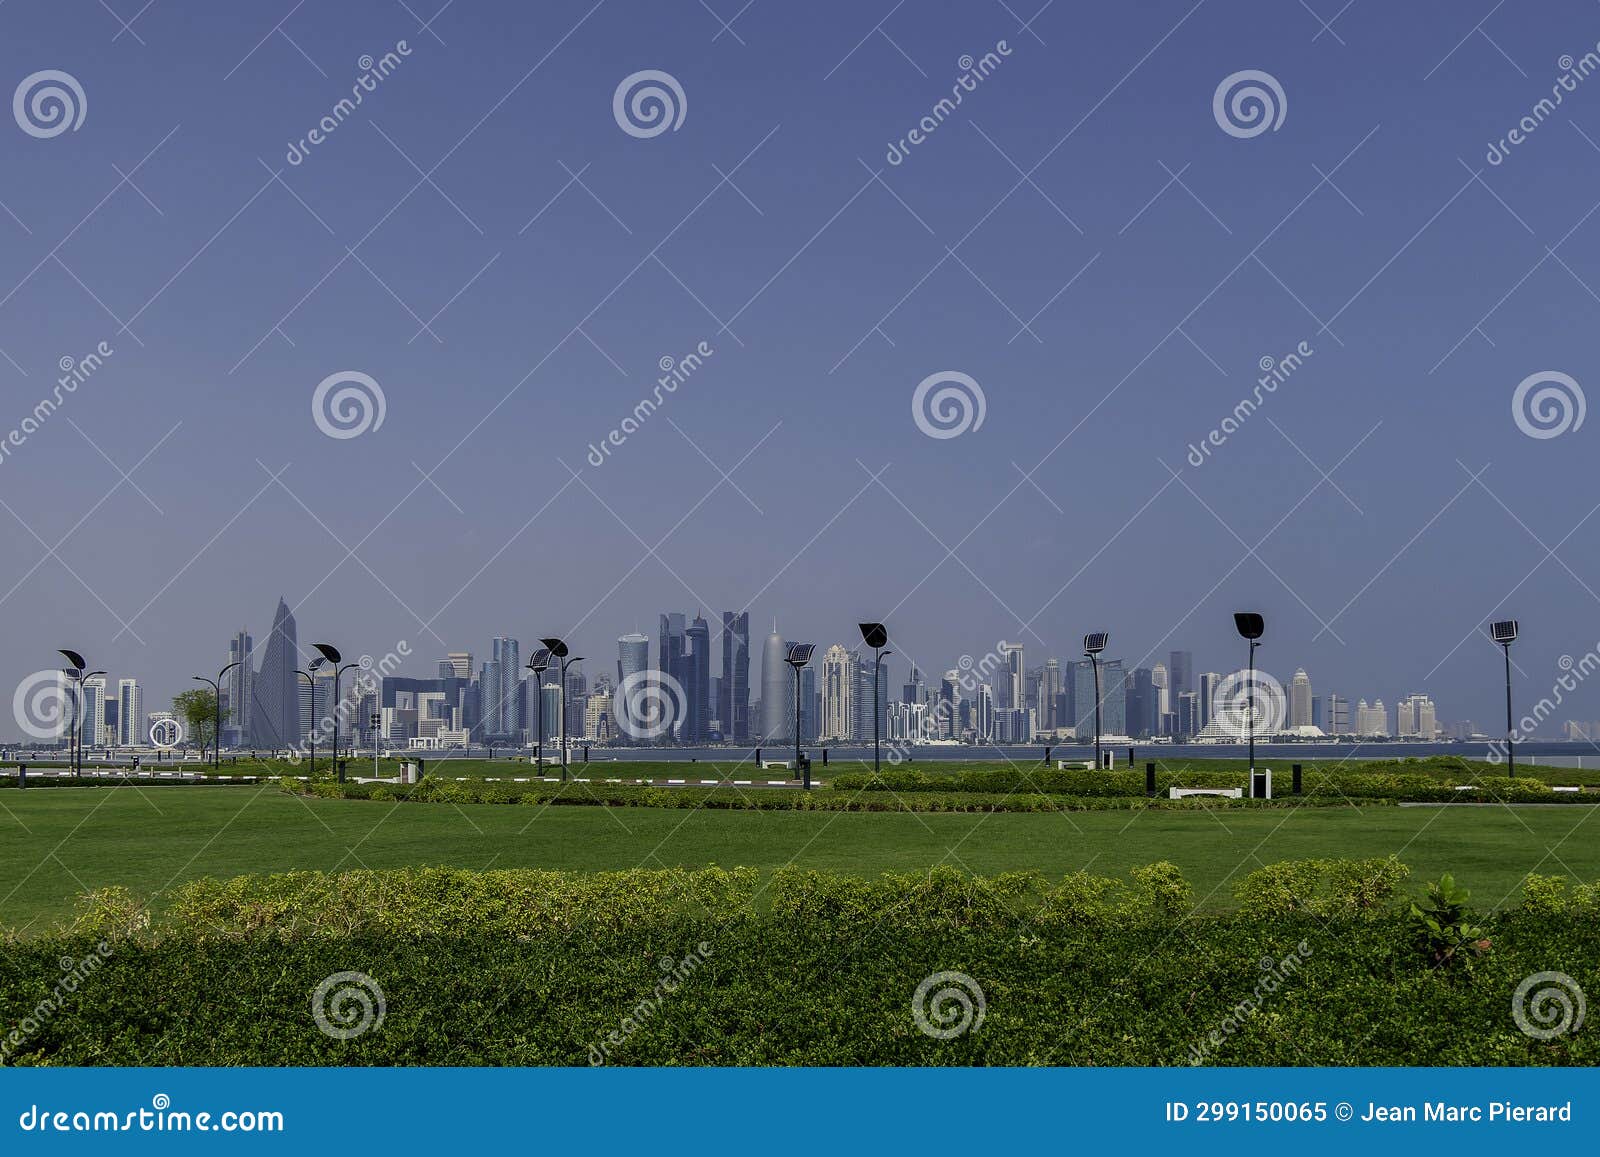 qatar, doha, view of skyscrapers from gardens